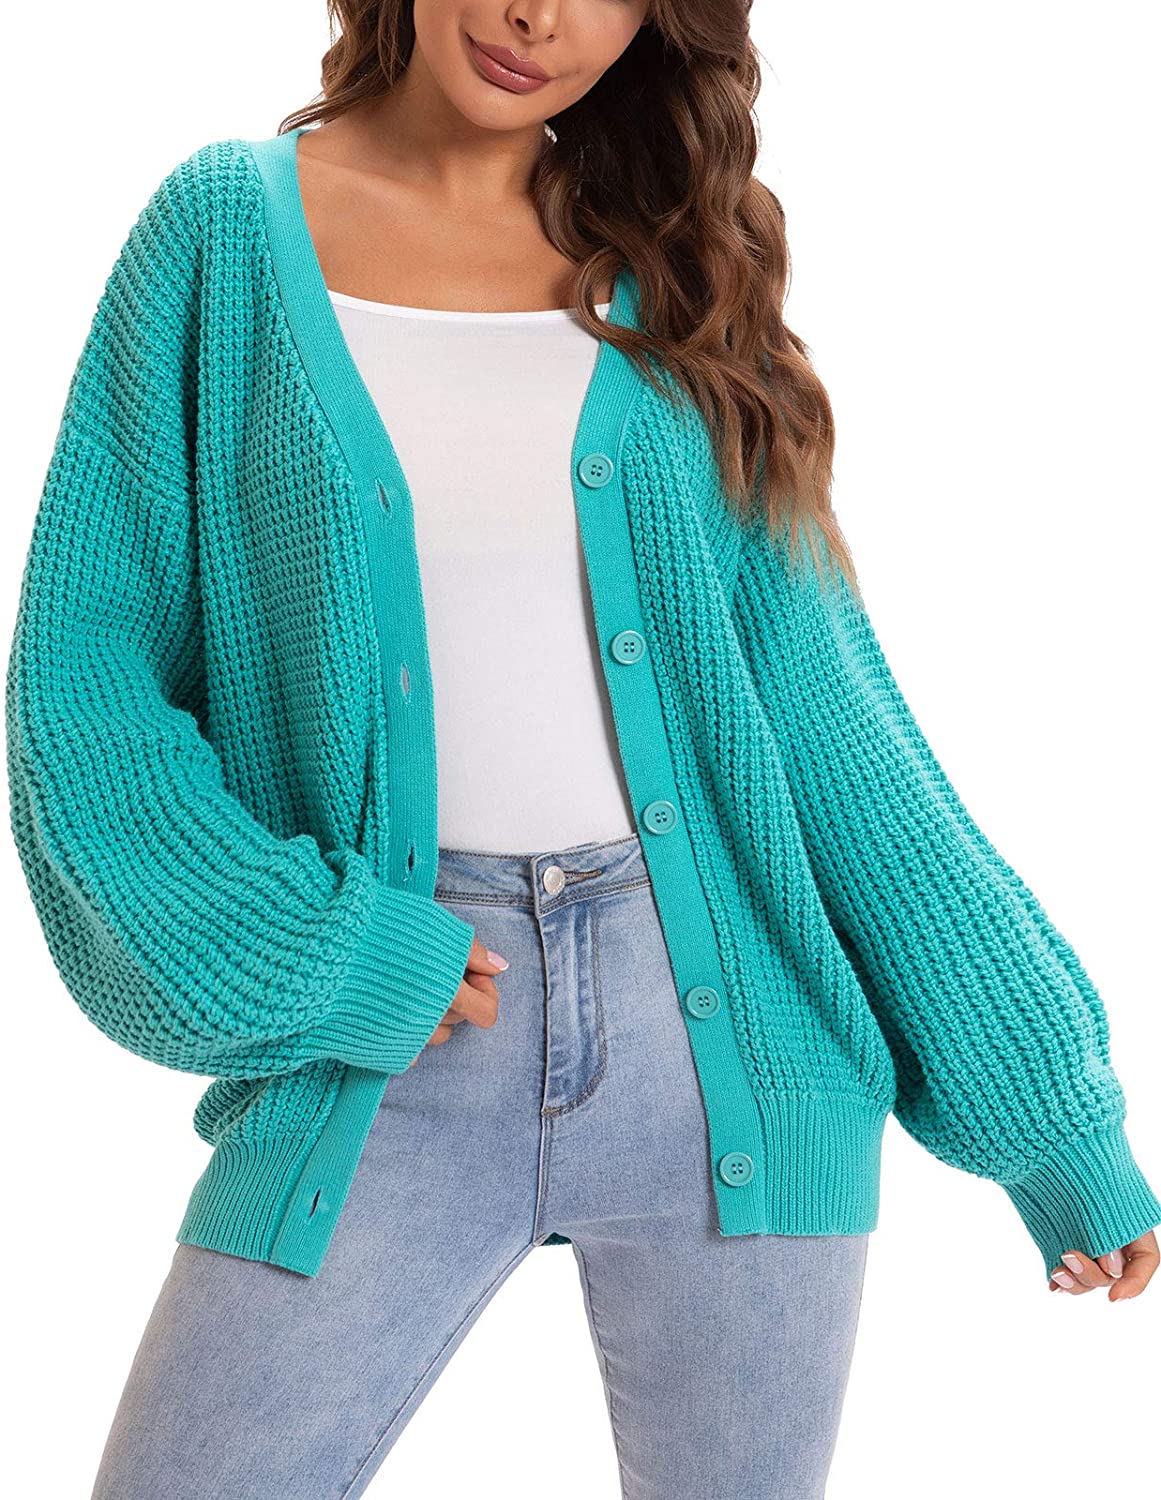 QUALFORT Womens Cardigan Sweater 100% Cotton Button-Down Long Sleeve Oversized Knit Cardigans